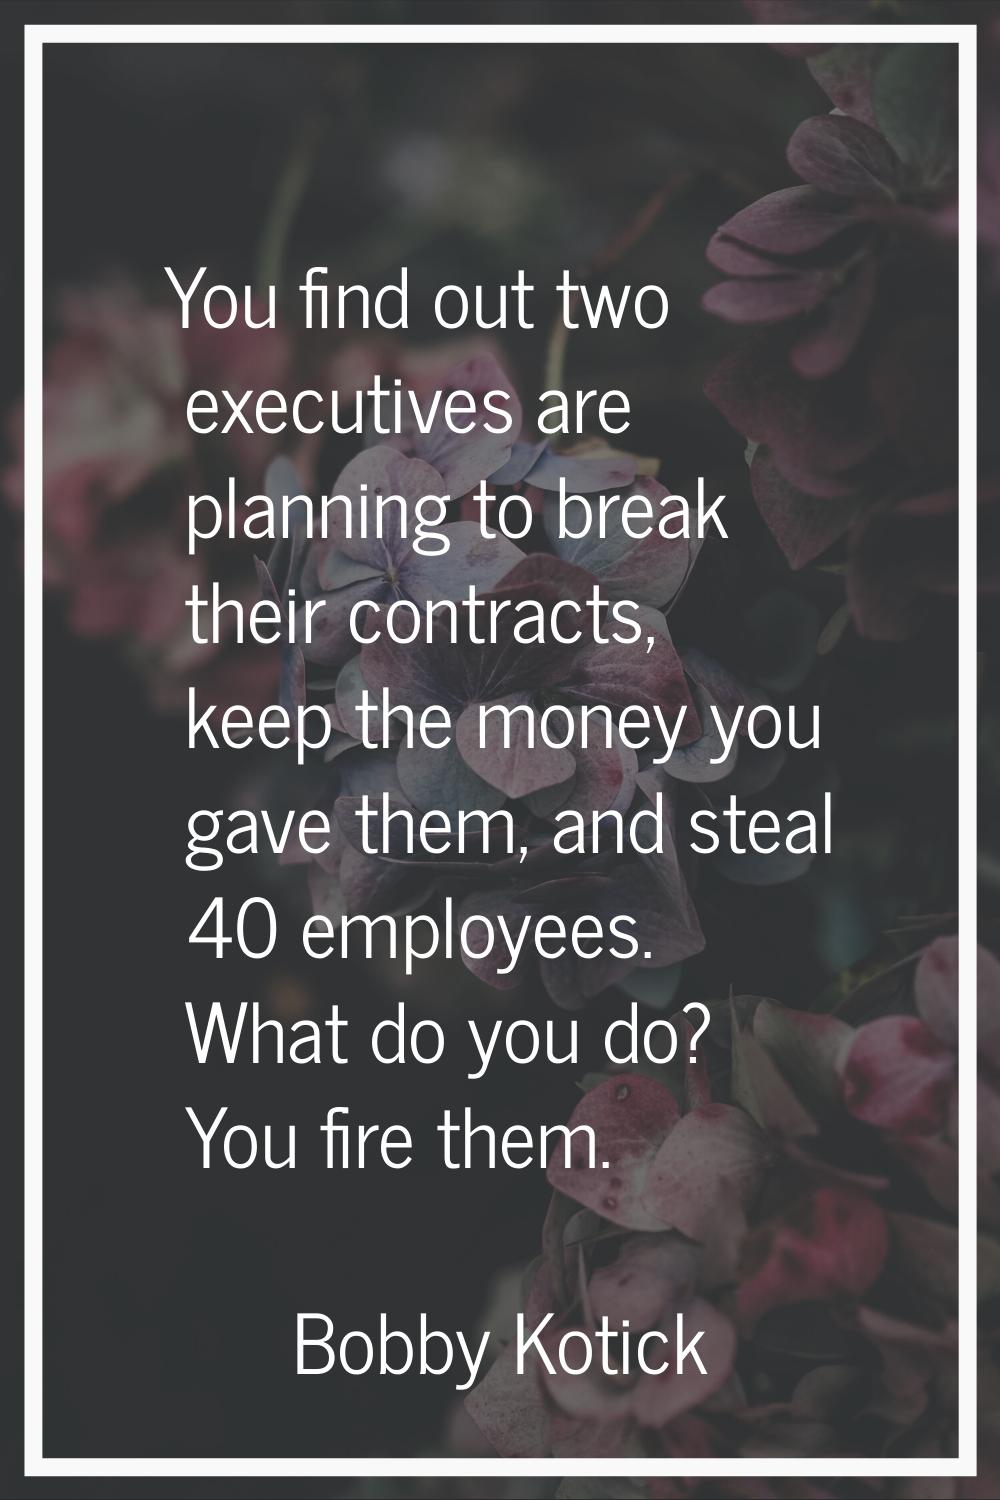 You find out two executives are planning to break their contracts, keep the money you gave them, an